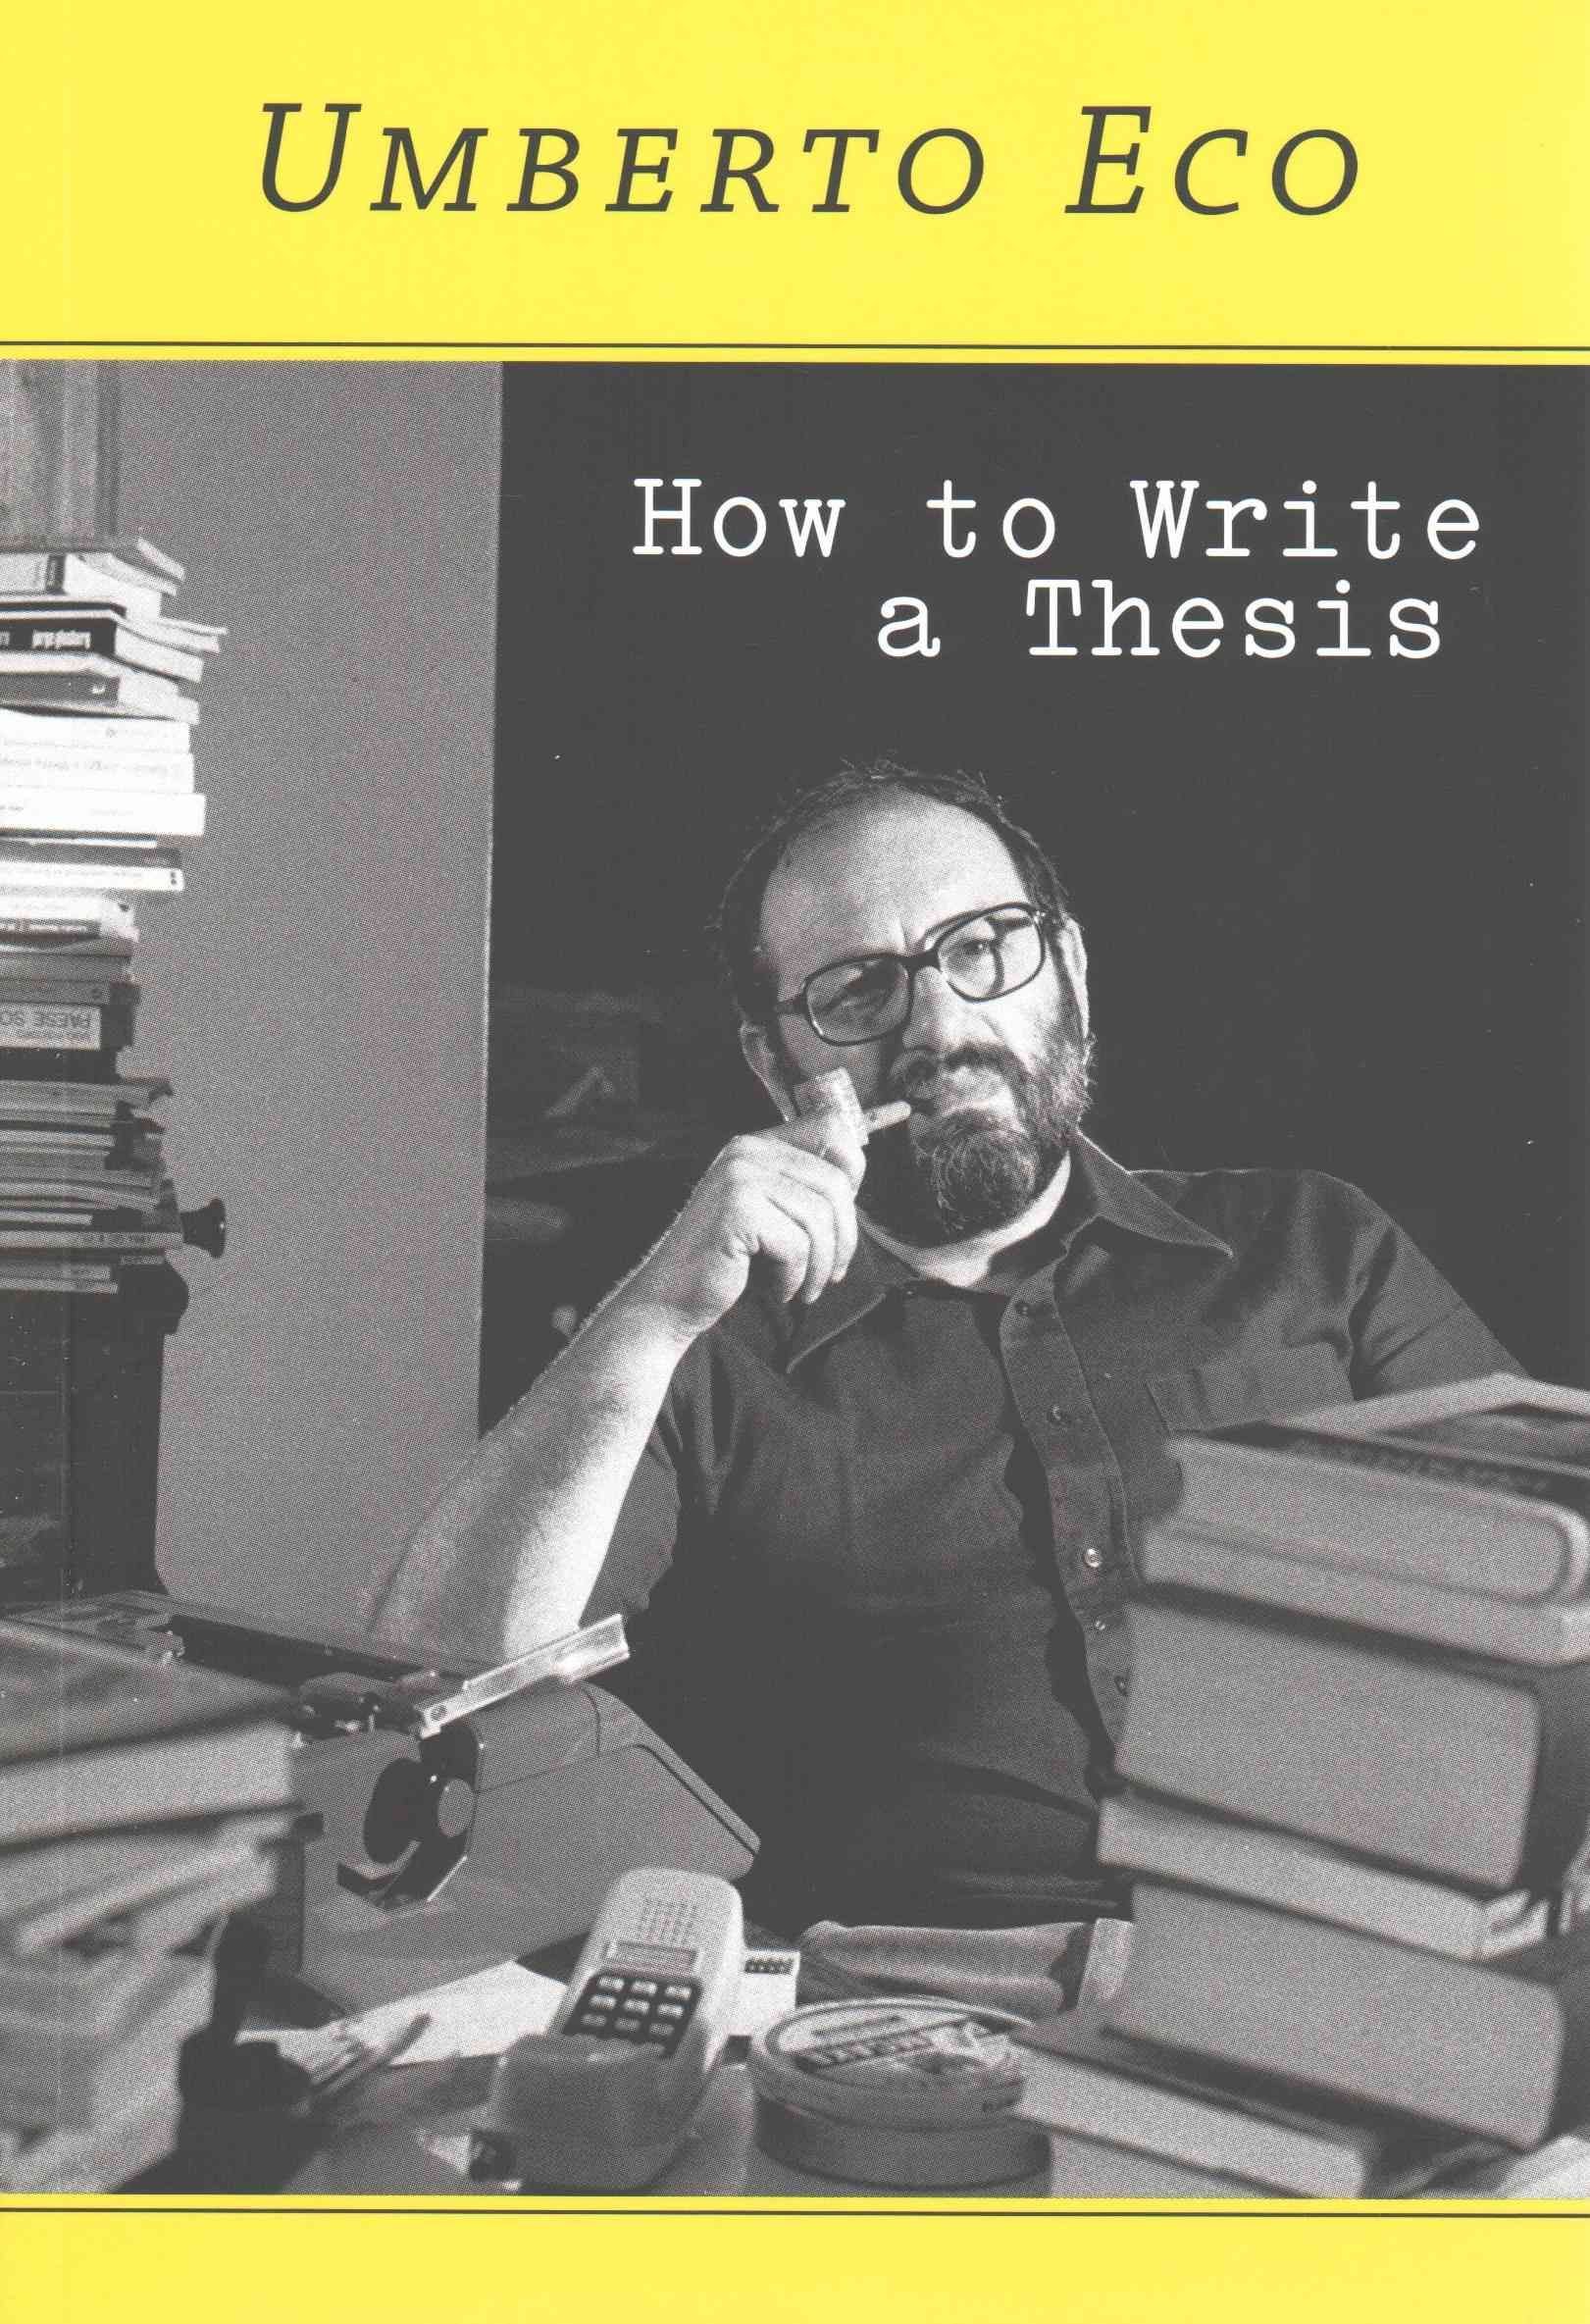 Buy How to Write a Thesis by Umberto Eco With Free Delivery